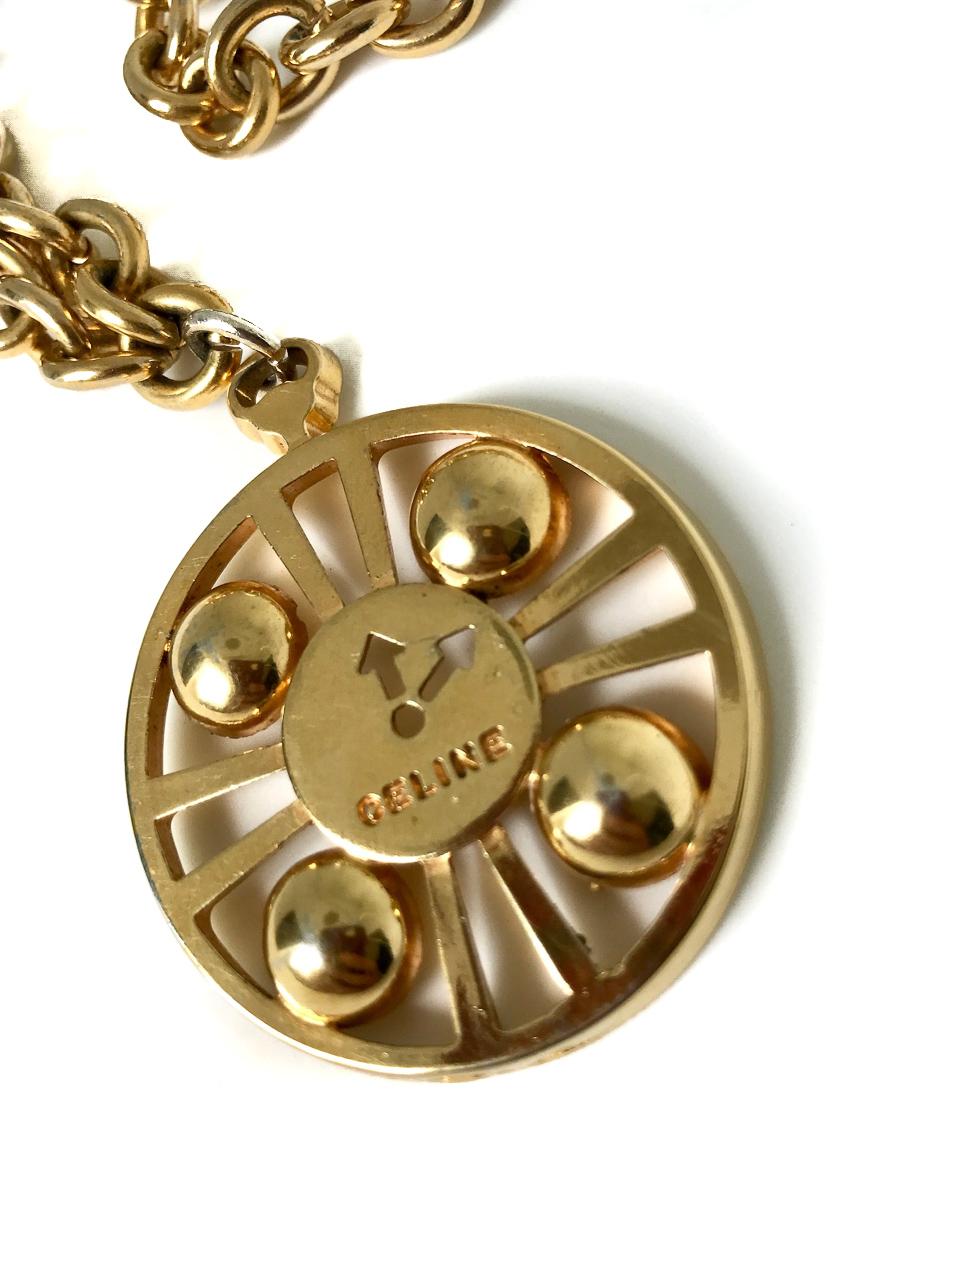 Celine 1990s Vintage Gold Plated Clock Pendant Necklace.  Can also be worn as a belt.

Rare, super cool and unexpectedly versatile.  Think 90s supermodels or late 80s / early 90s hip hop.  

Stamped 